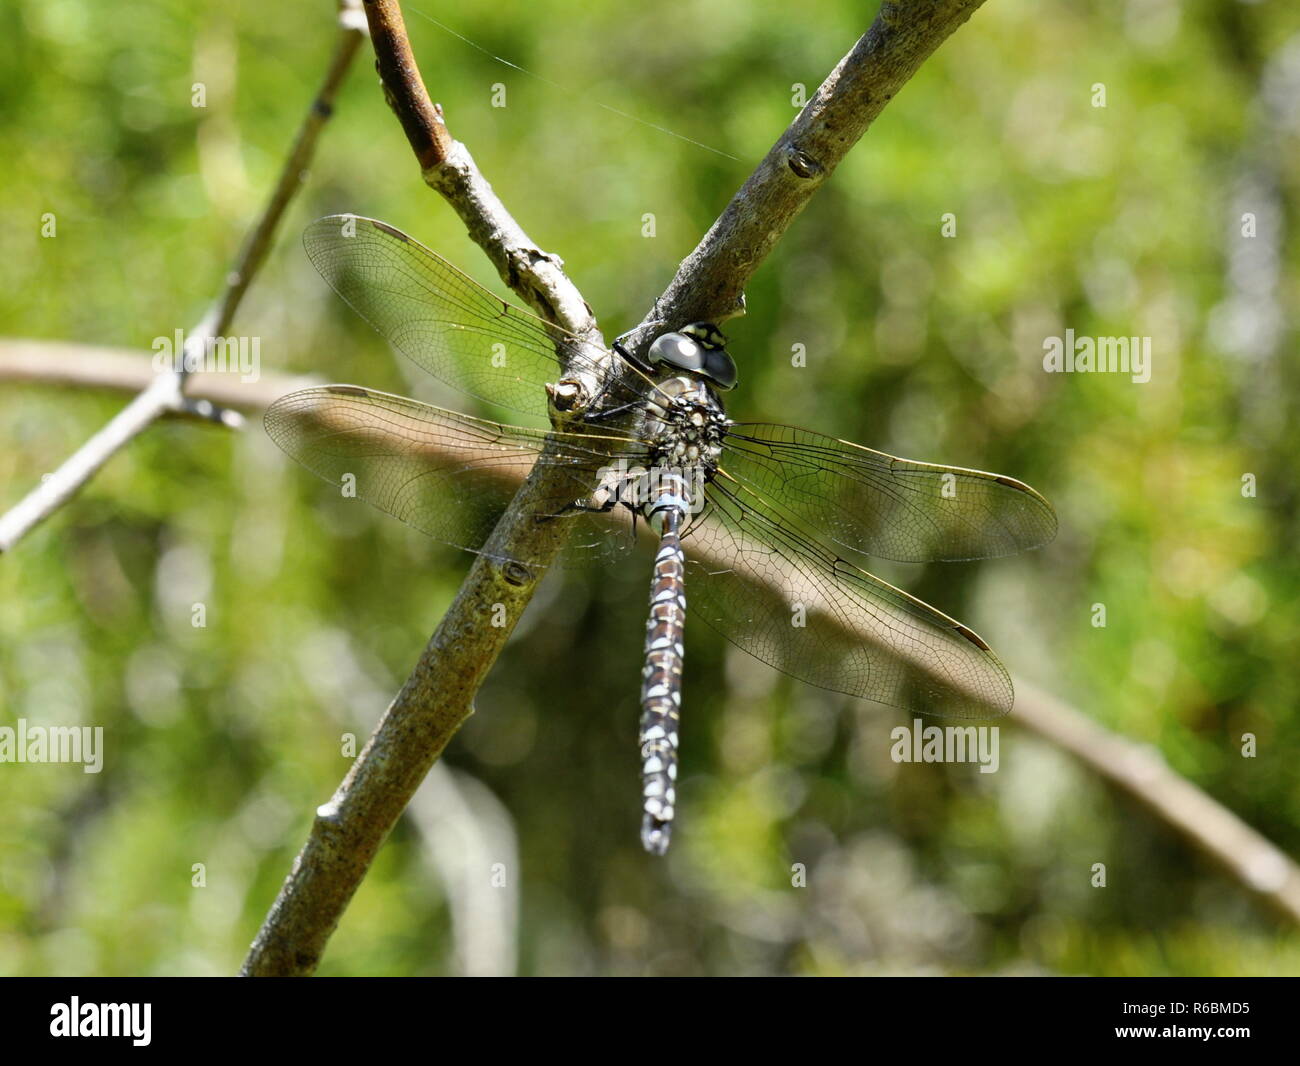 The dragonfly Aeshna subarctica sitting on a twig Stock Photo